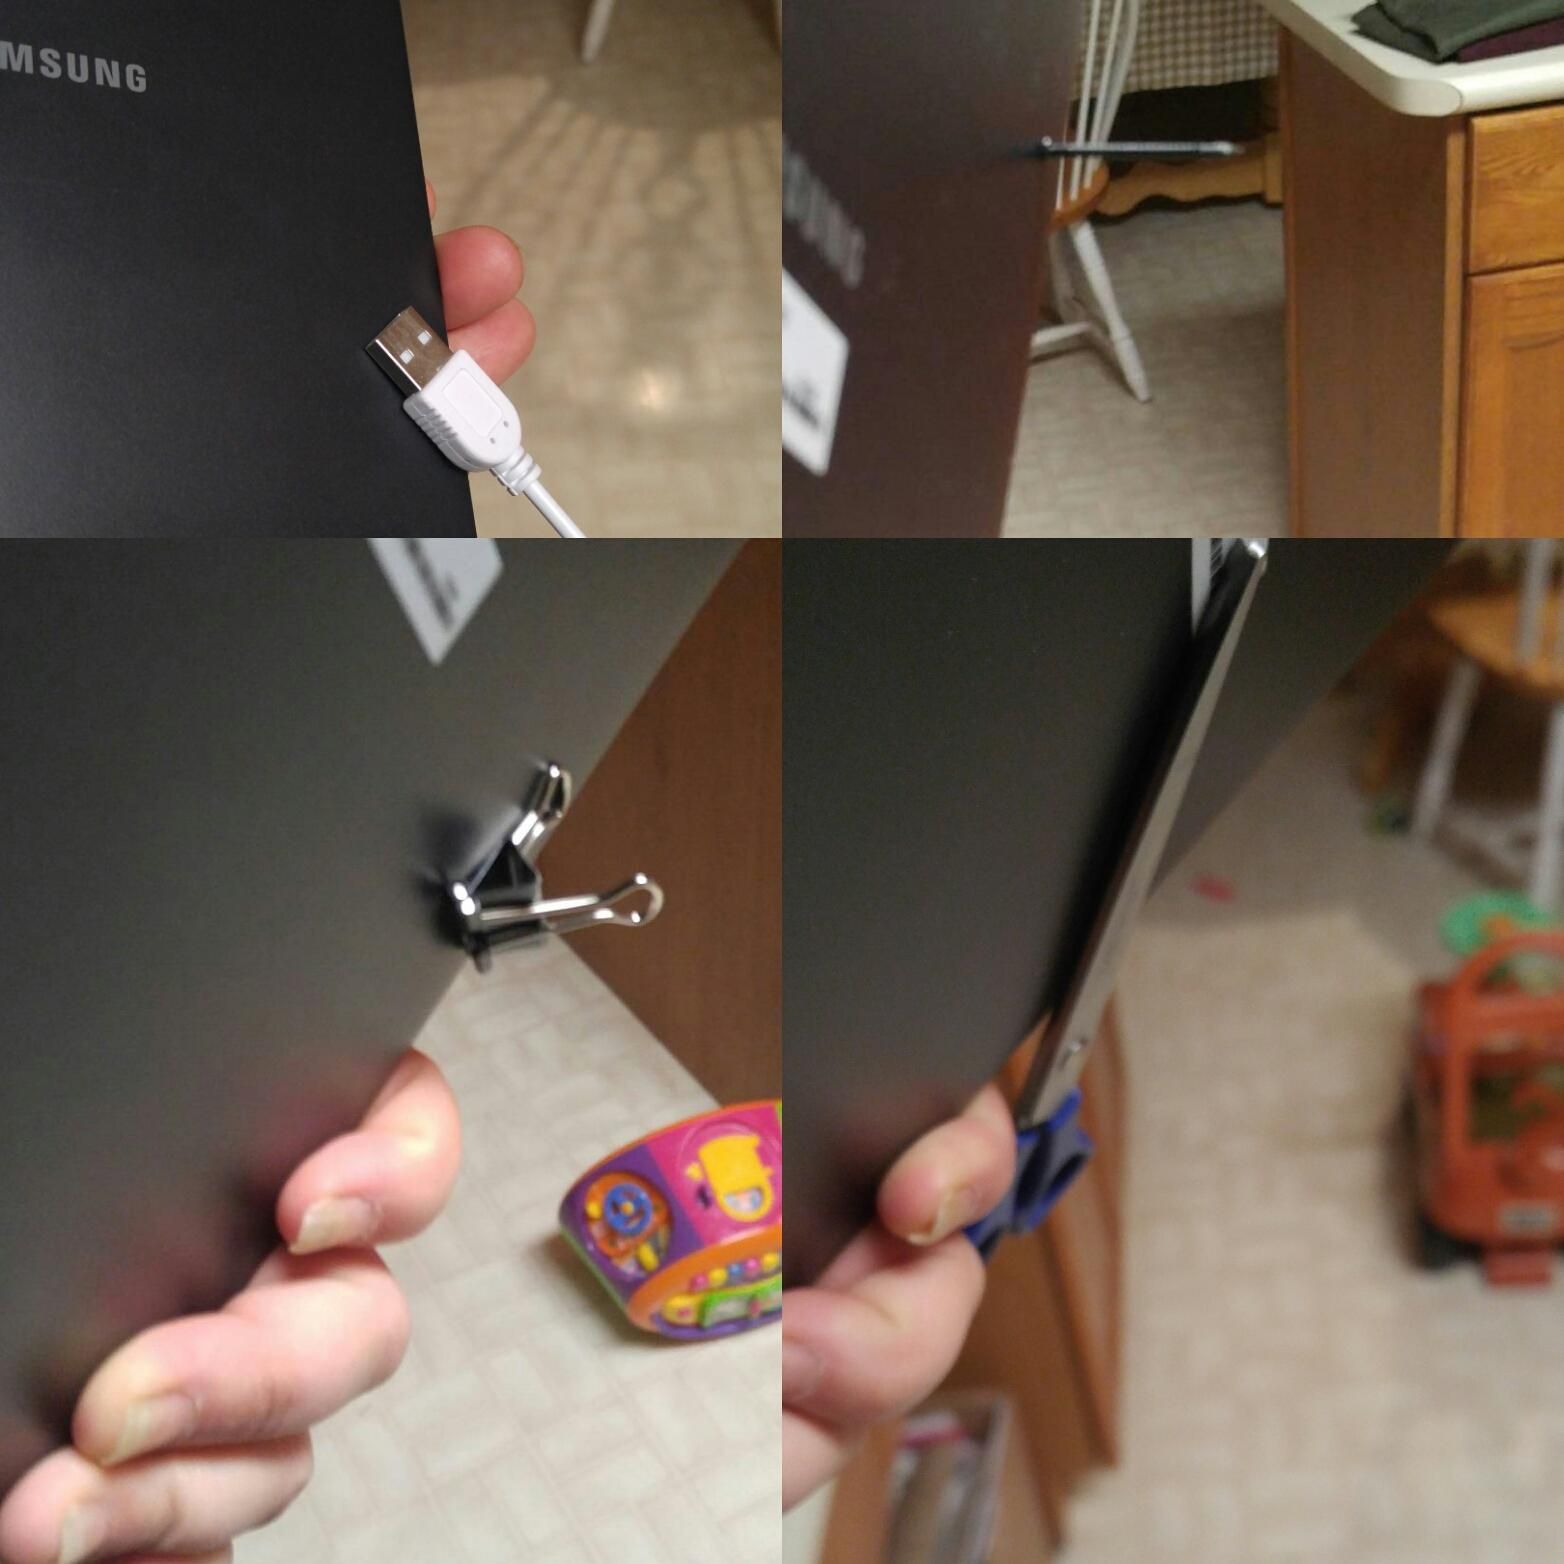 Samsung support says the casing on my new out of the box tablet is not Magnetized. I beg to differ.